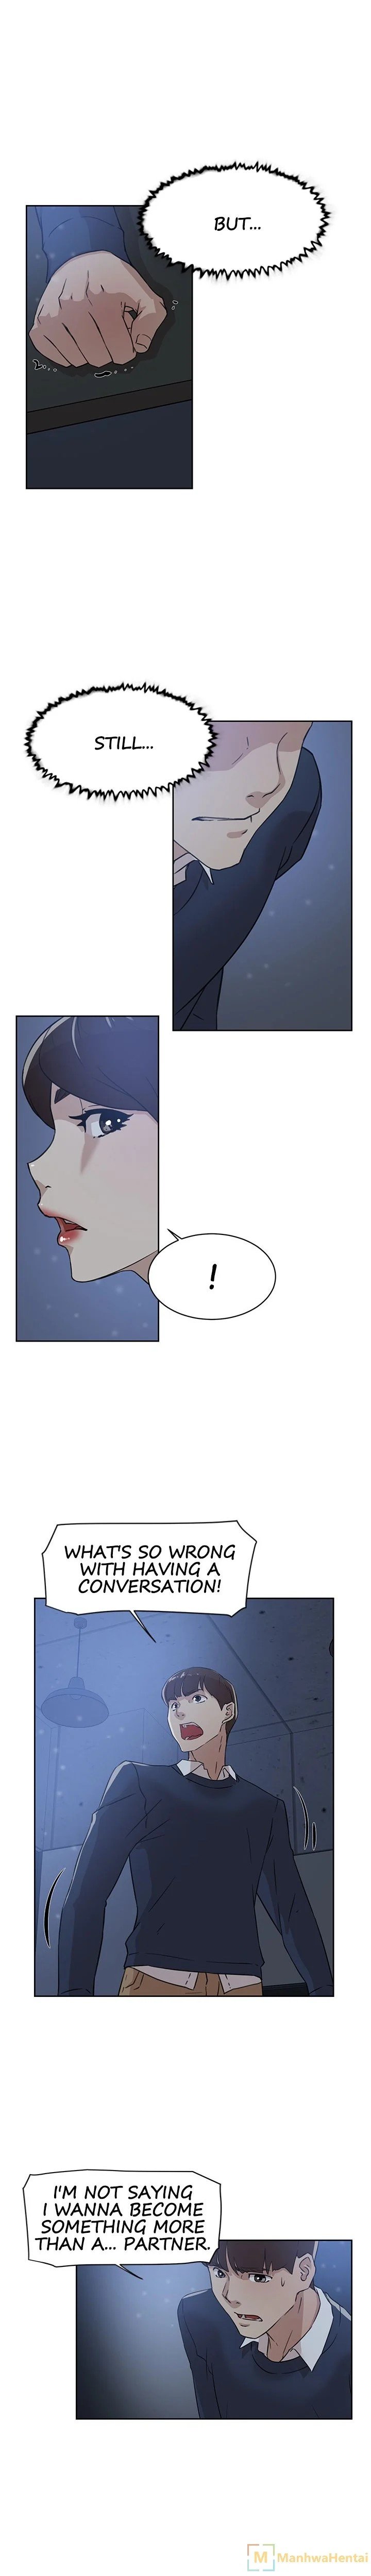 office-affairs-chap-33-2